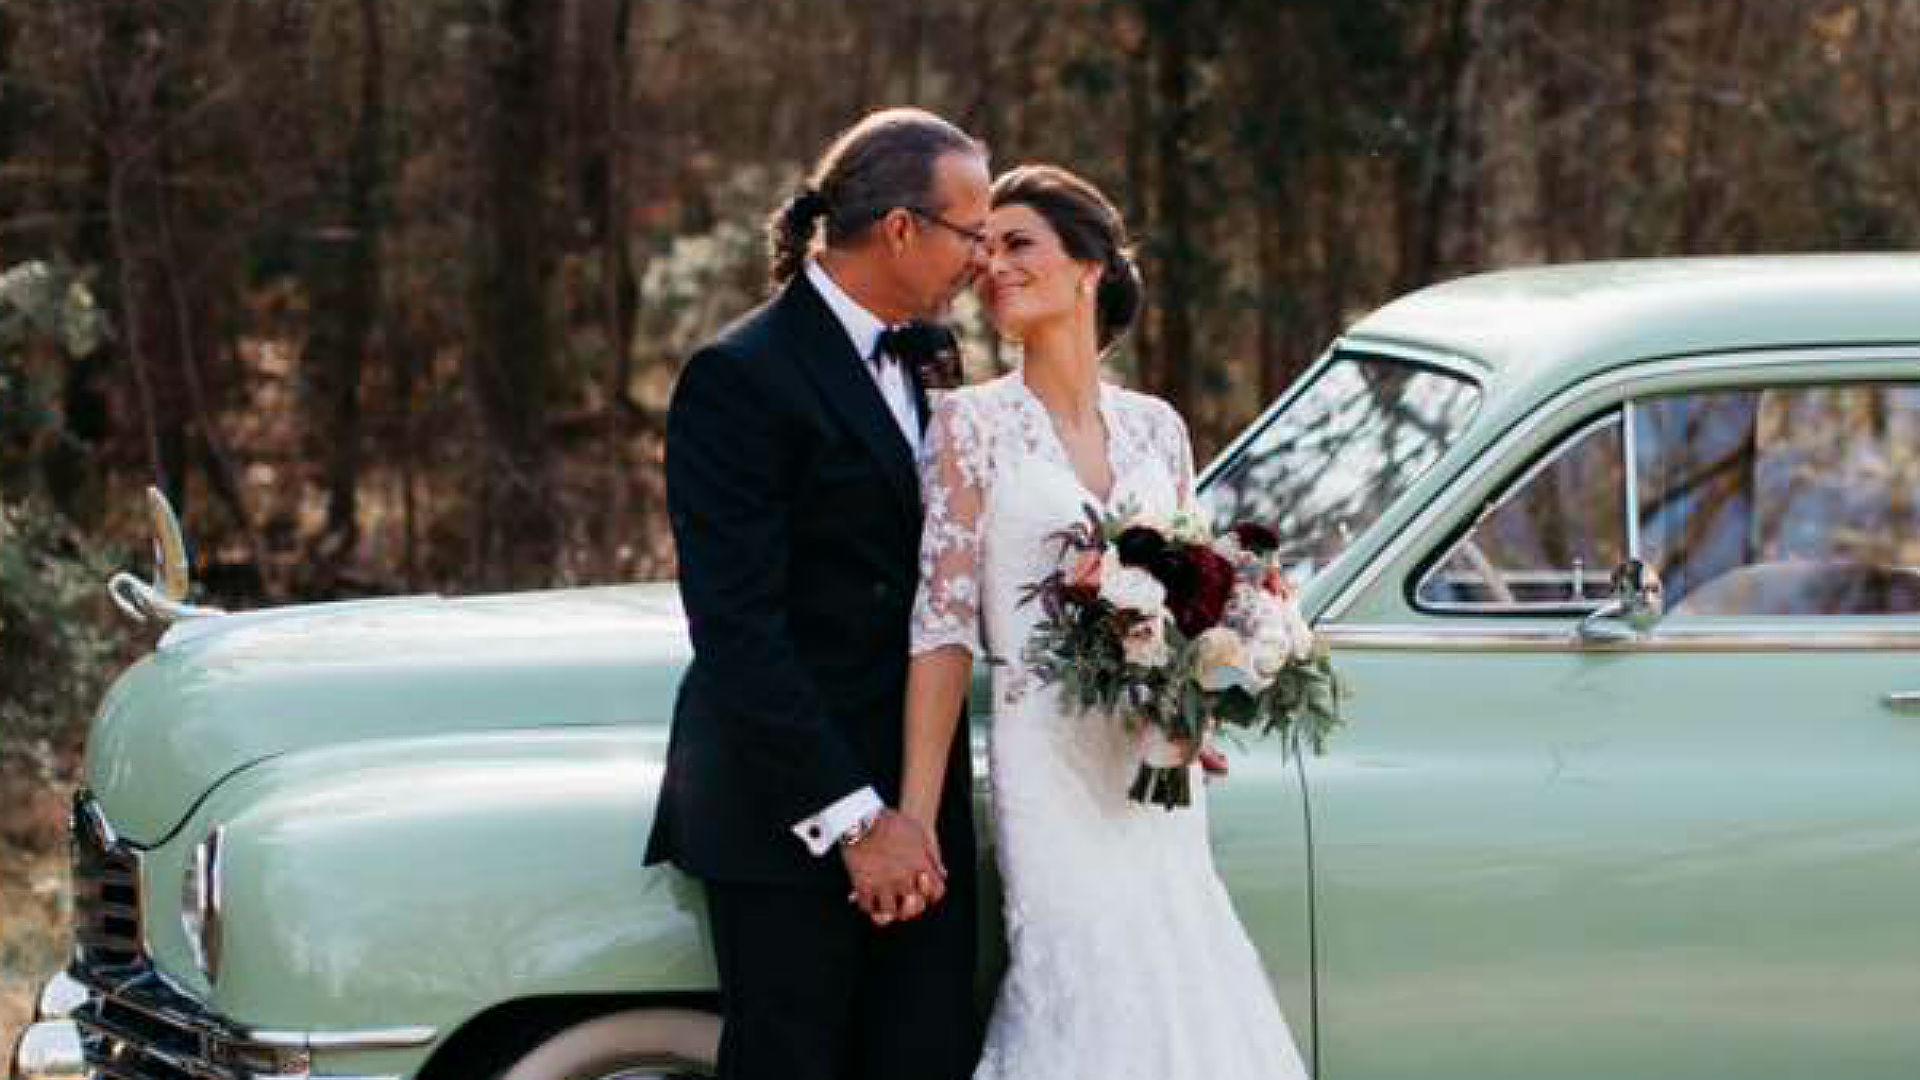 Kyle Petty marries director of his charity motorcycle ride | NASCAR | Sporting News